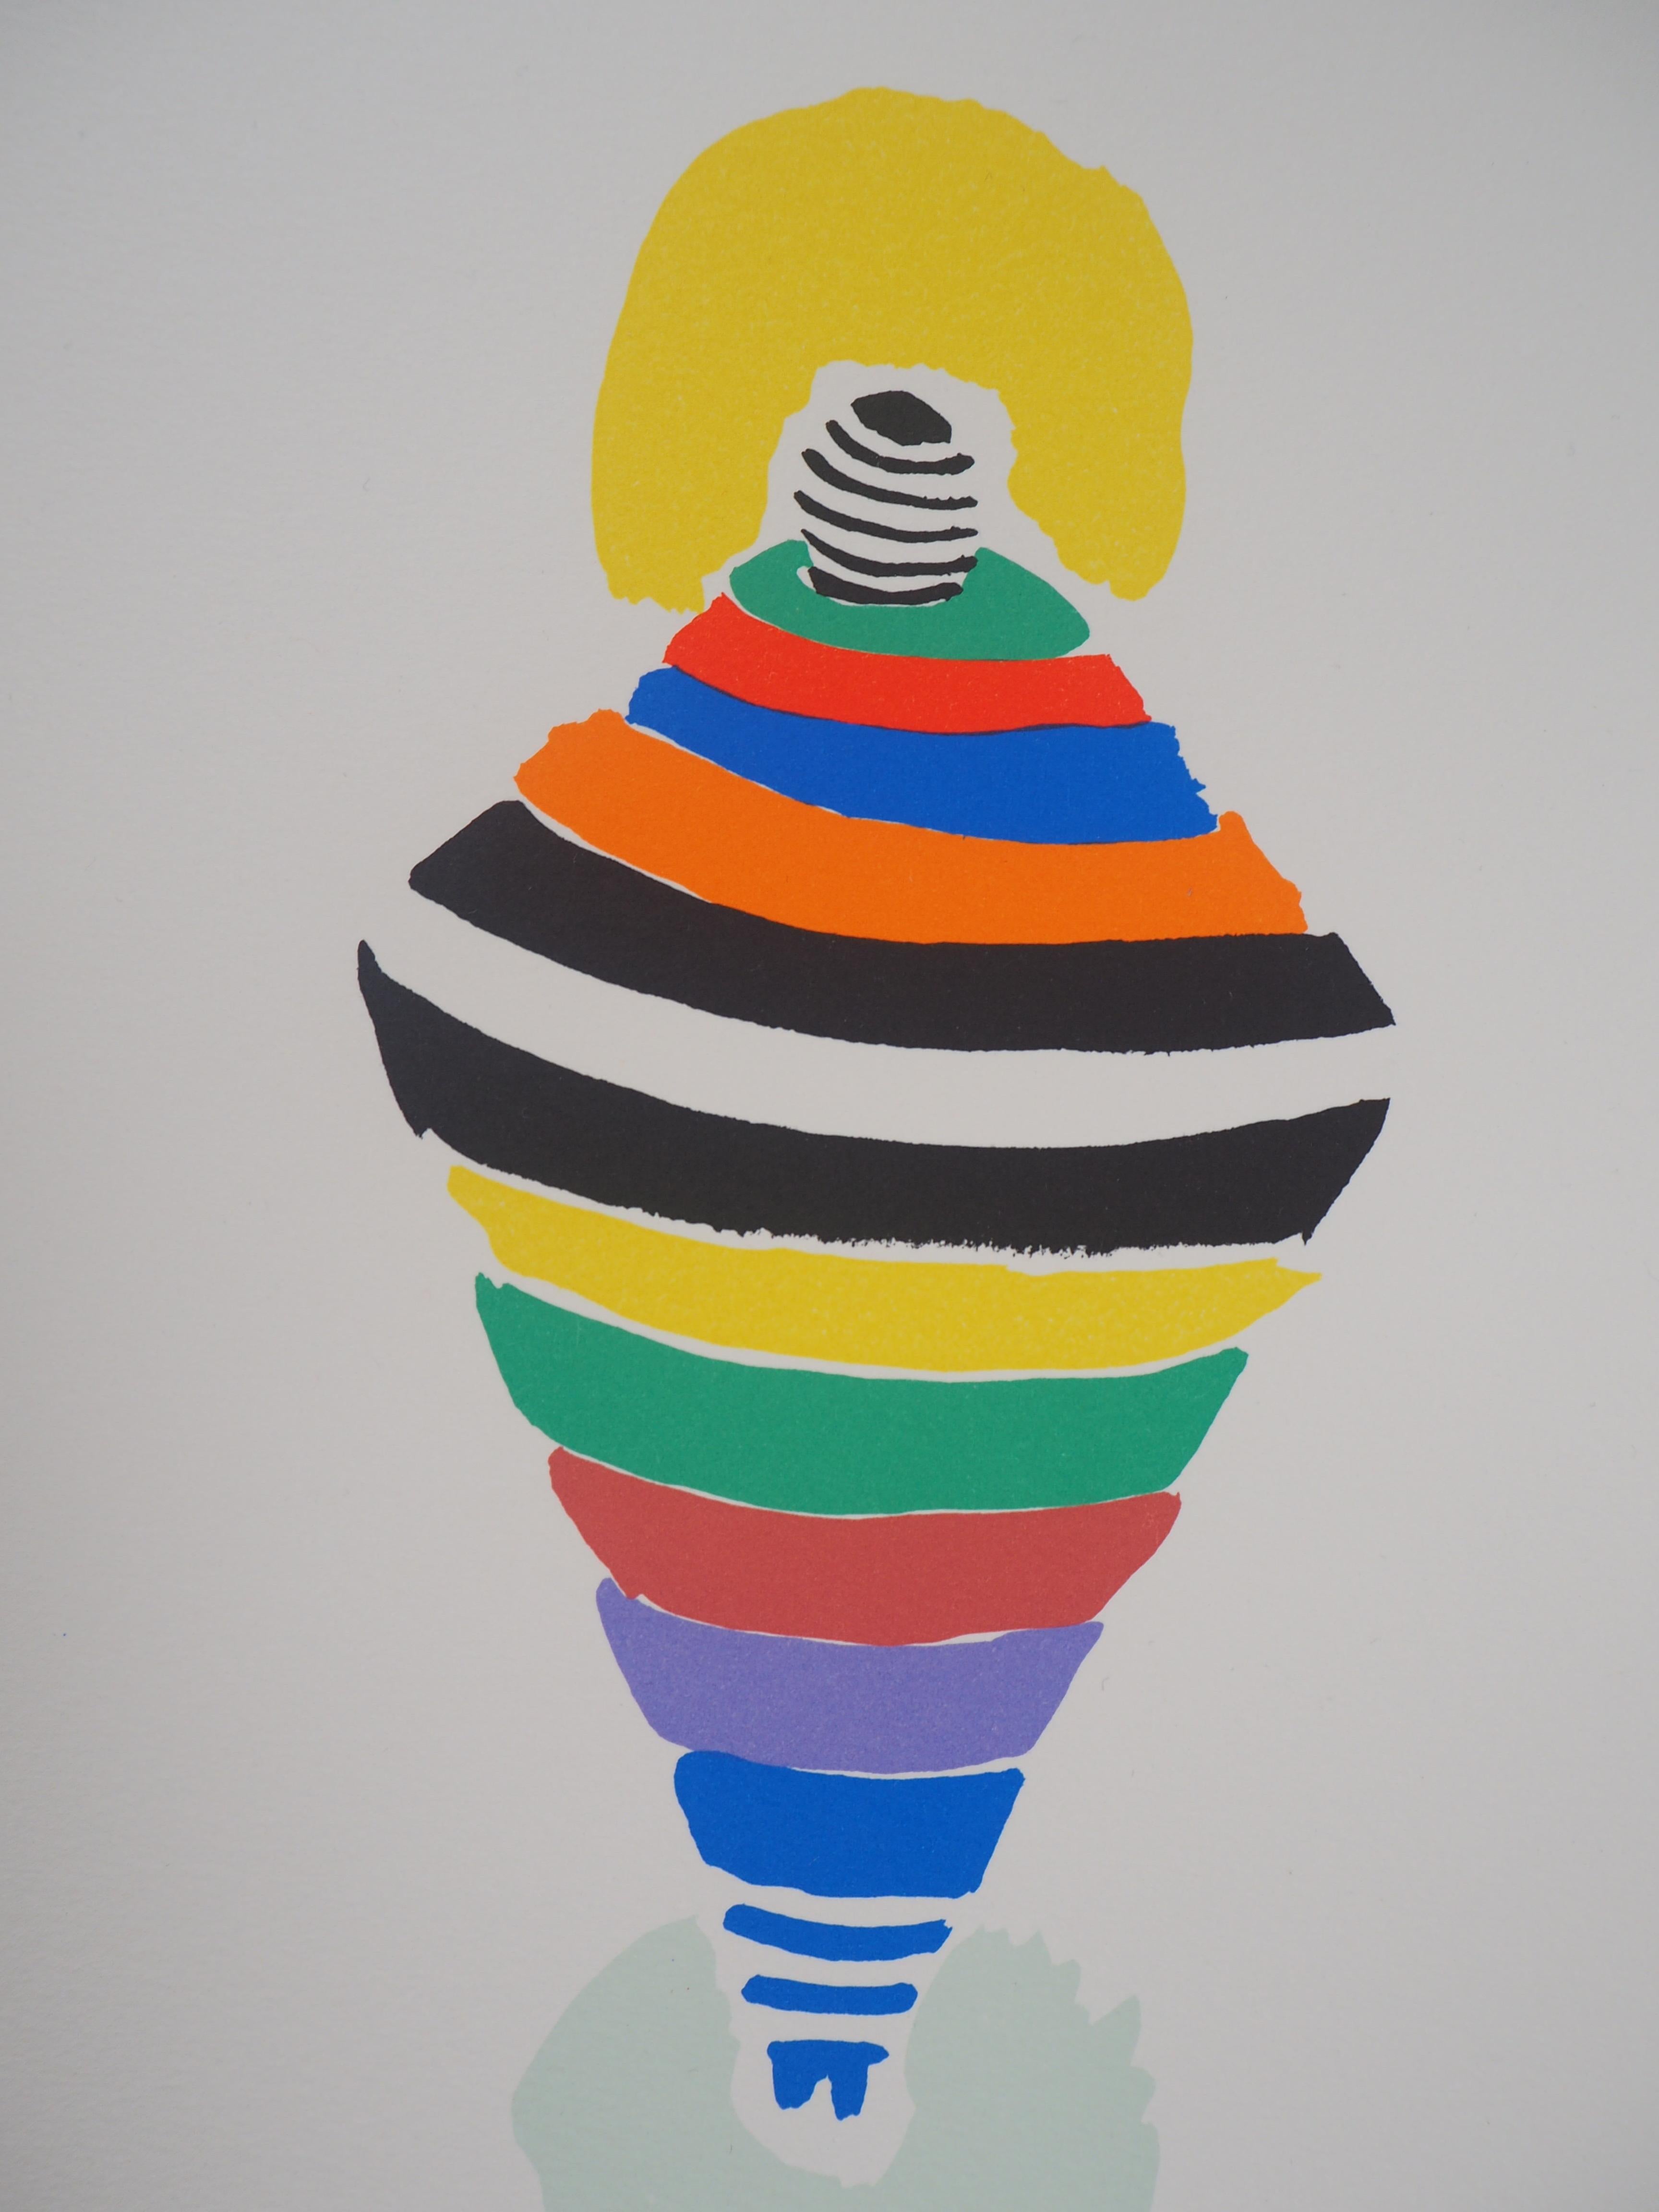 Rio Spinning Dress - Lithograph (Artcurial edition) - Modern Print by Sonia Delaunay